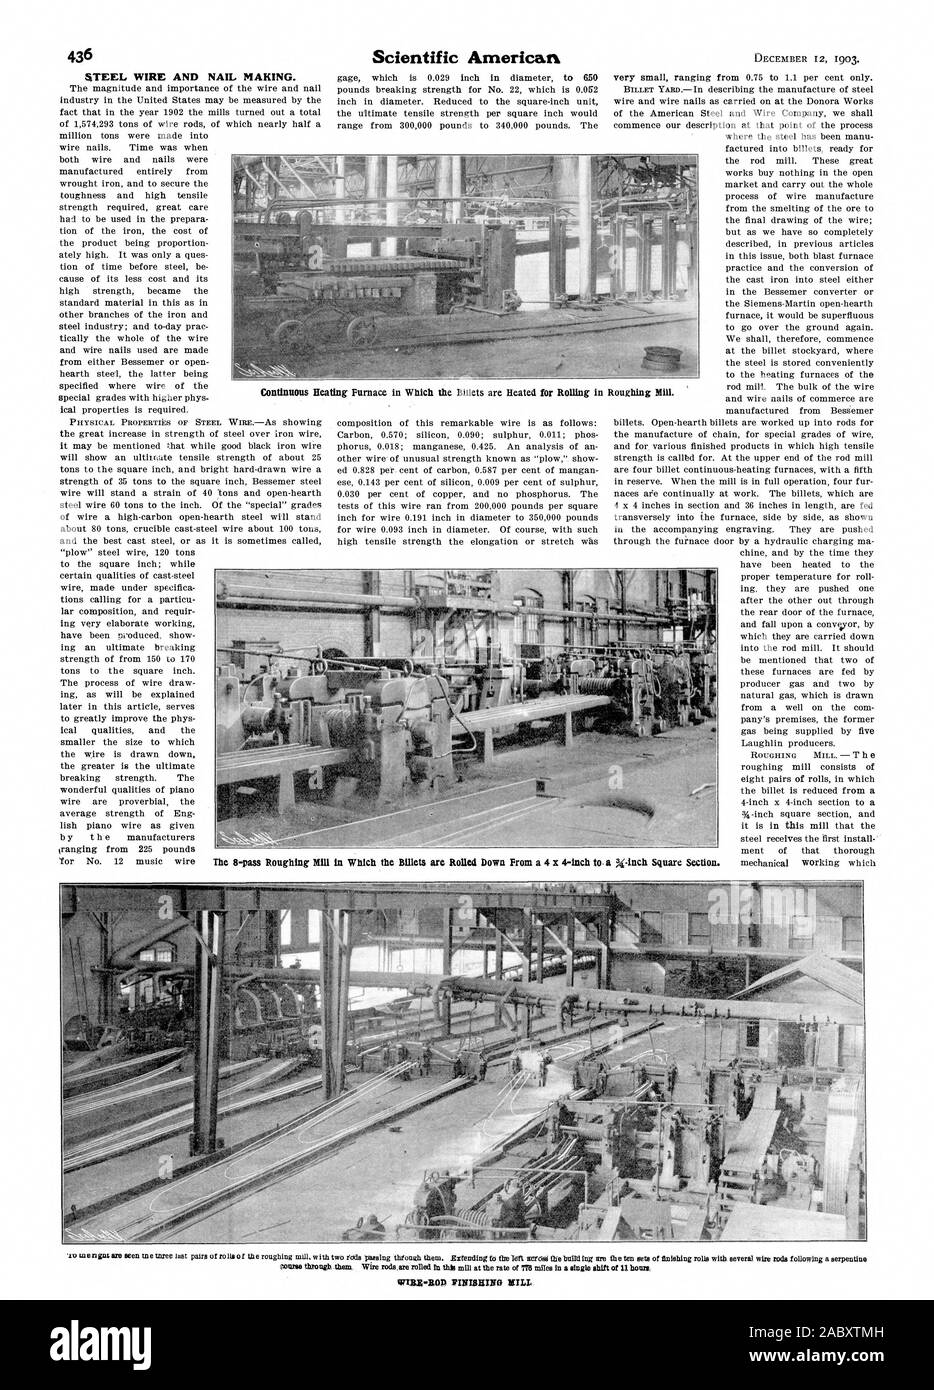 436 STEEL WIRE AND NAIL MAKING. Scientific American The 8-pass Roughing Mill in Which the Billets are Rolled Down From a 4 x 4-inch tna nch Square Section. course through them Wire rodkare rolled in this mill at the rate of 778 miles in a single shift of  hours WIRR-ROA WIND:MING MILT, 1903-12-12 Stock Photo